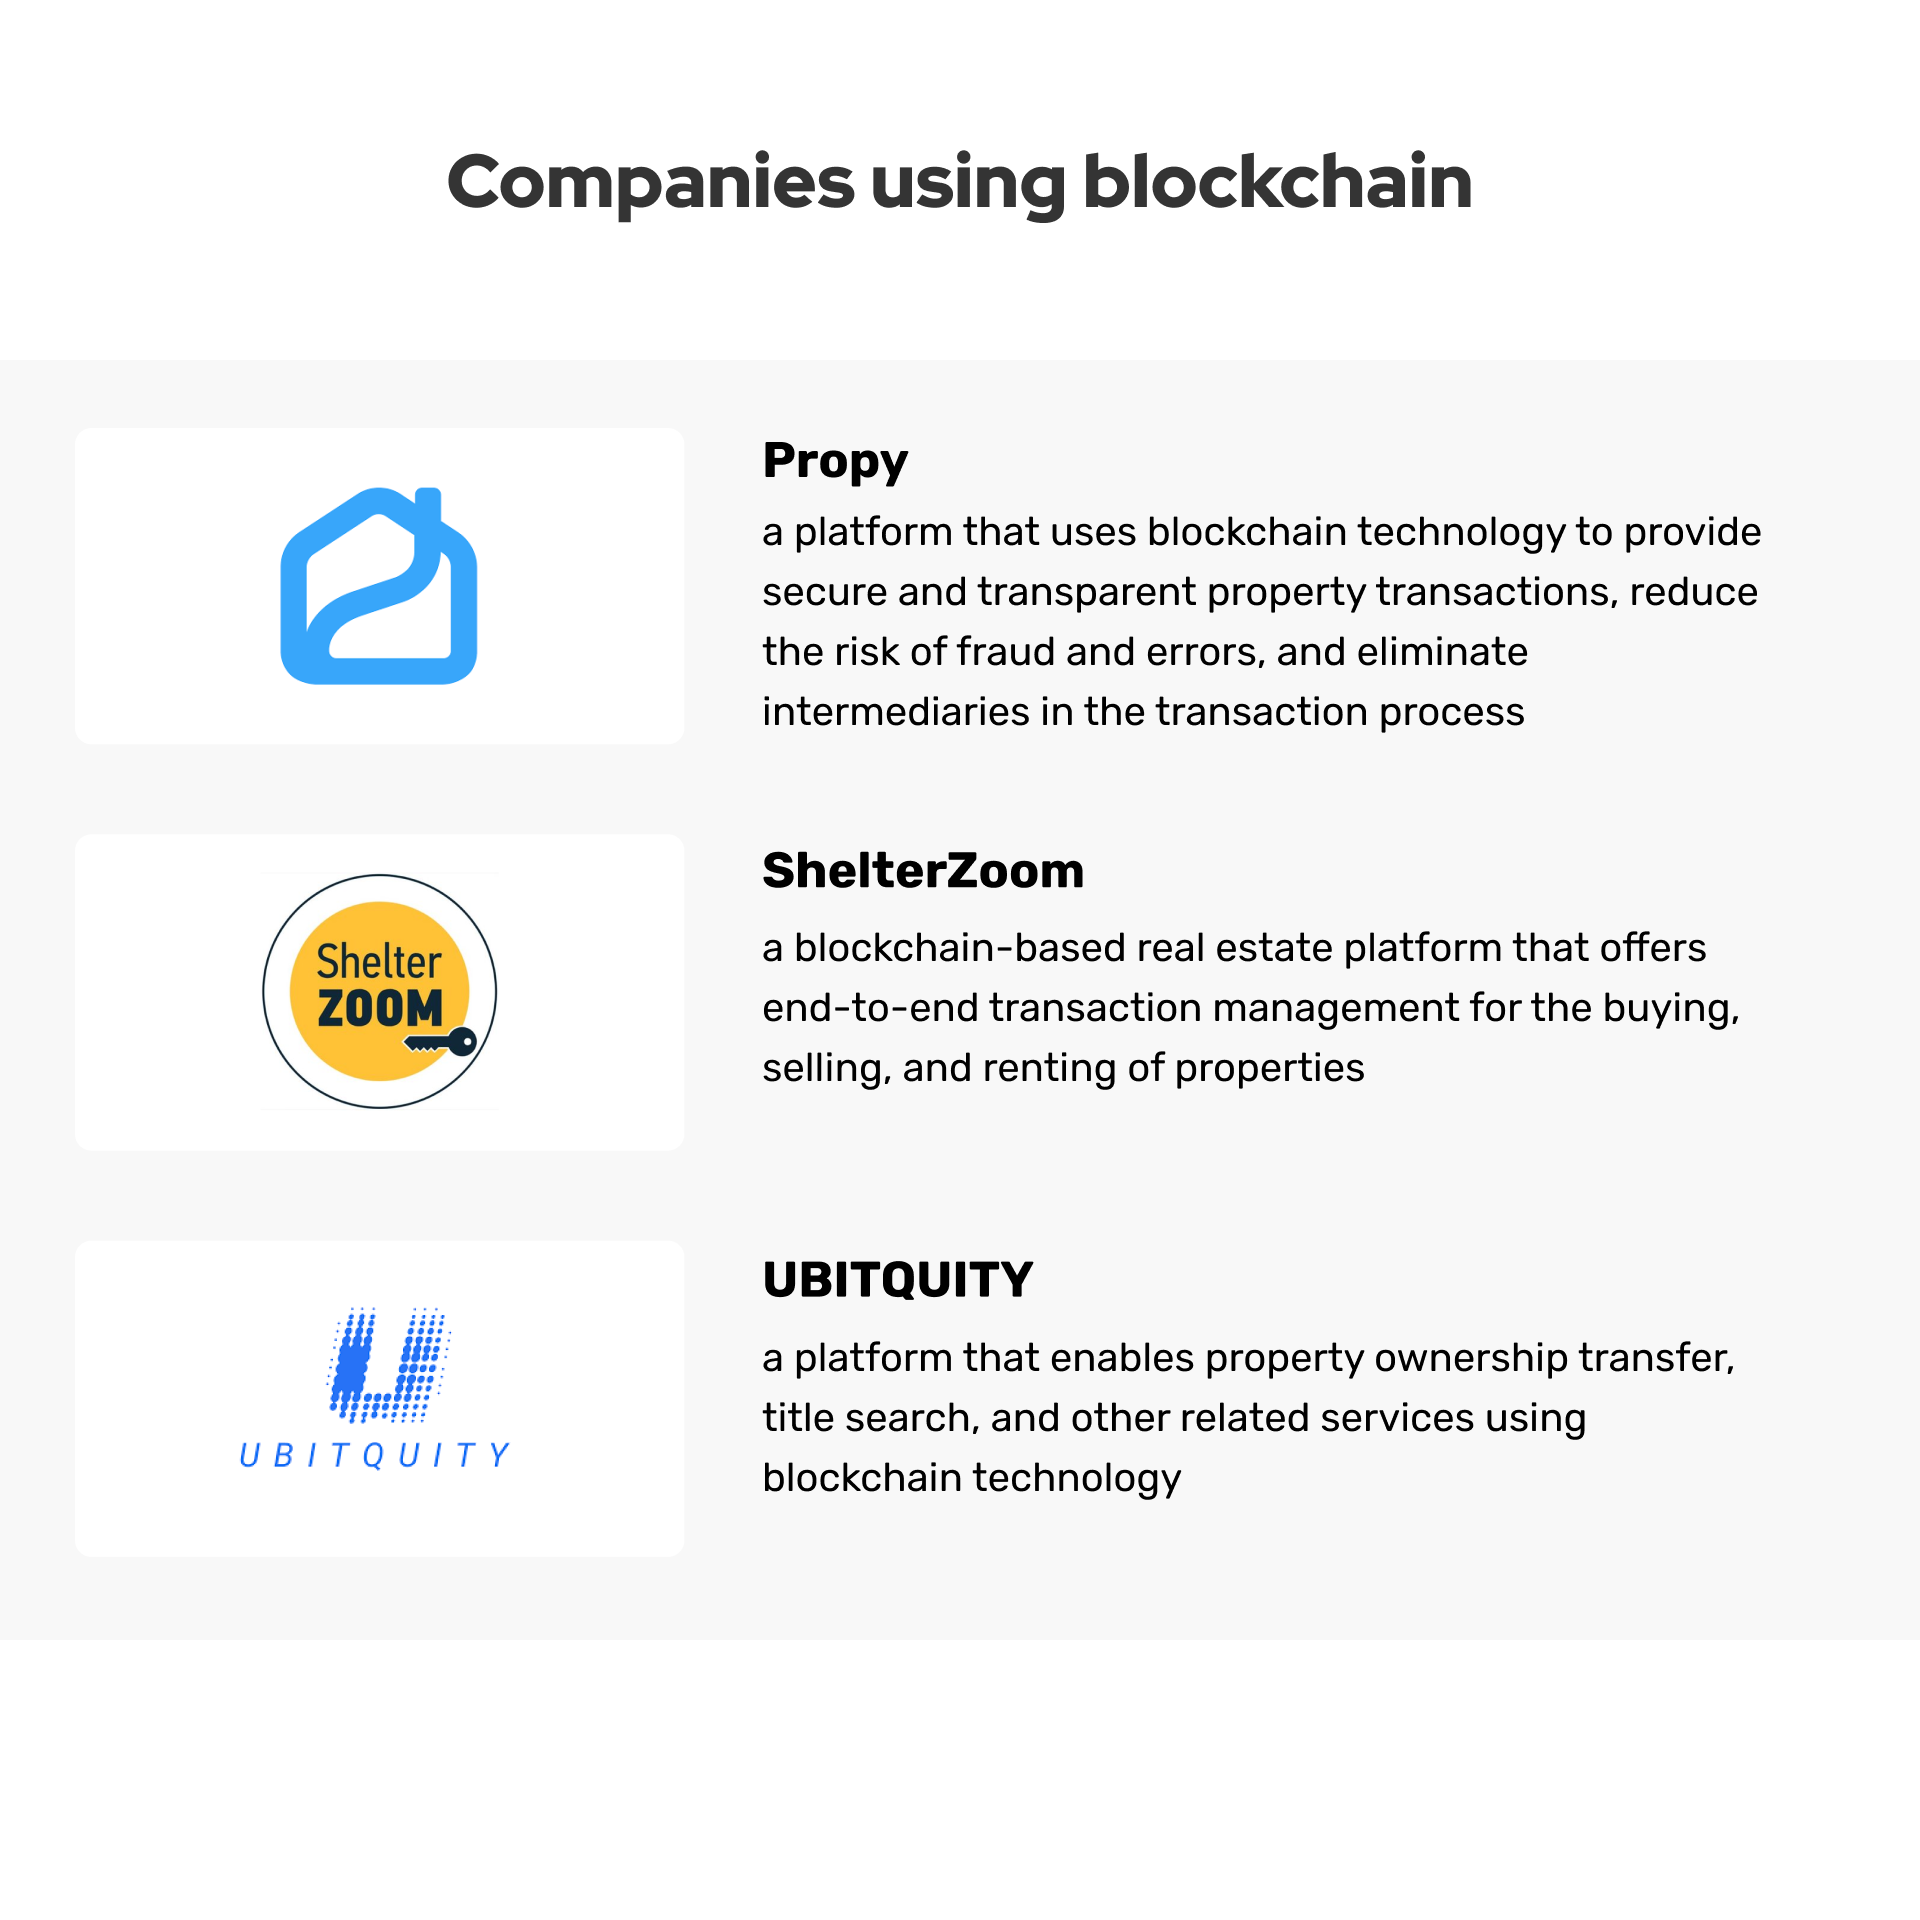 Propy, ShelterZoom, and UBITQUITY are among the real estate companies that have already incorporated blockchain technology into their operations.